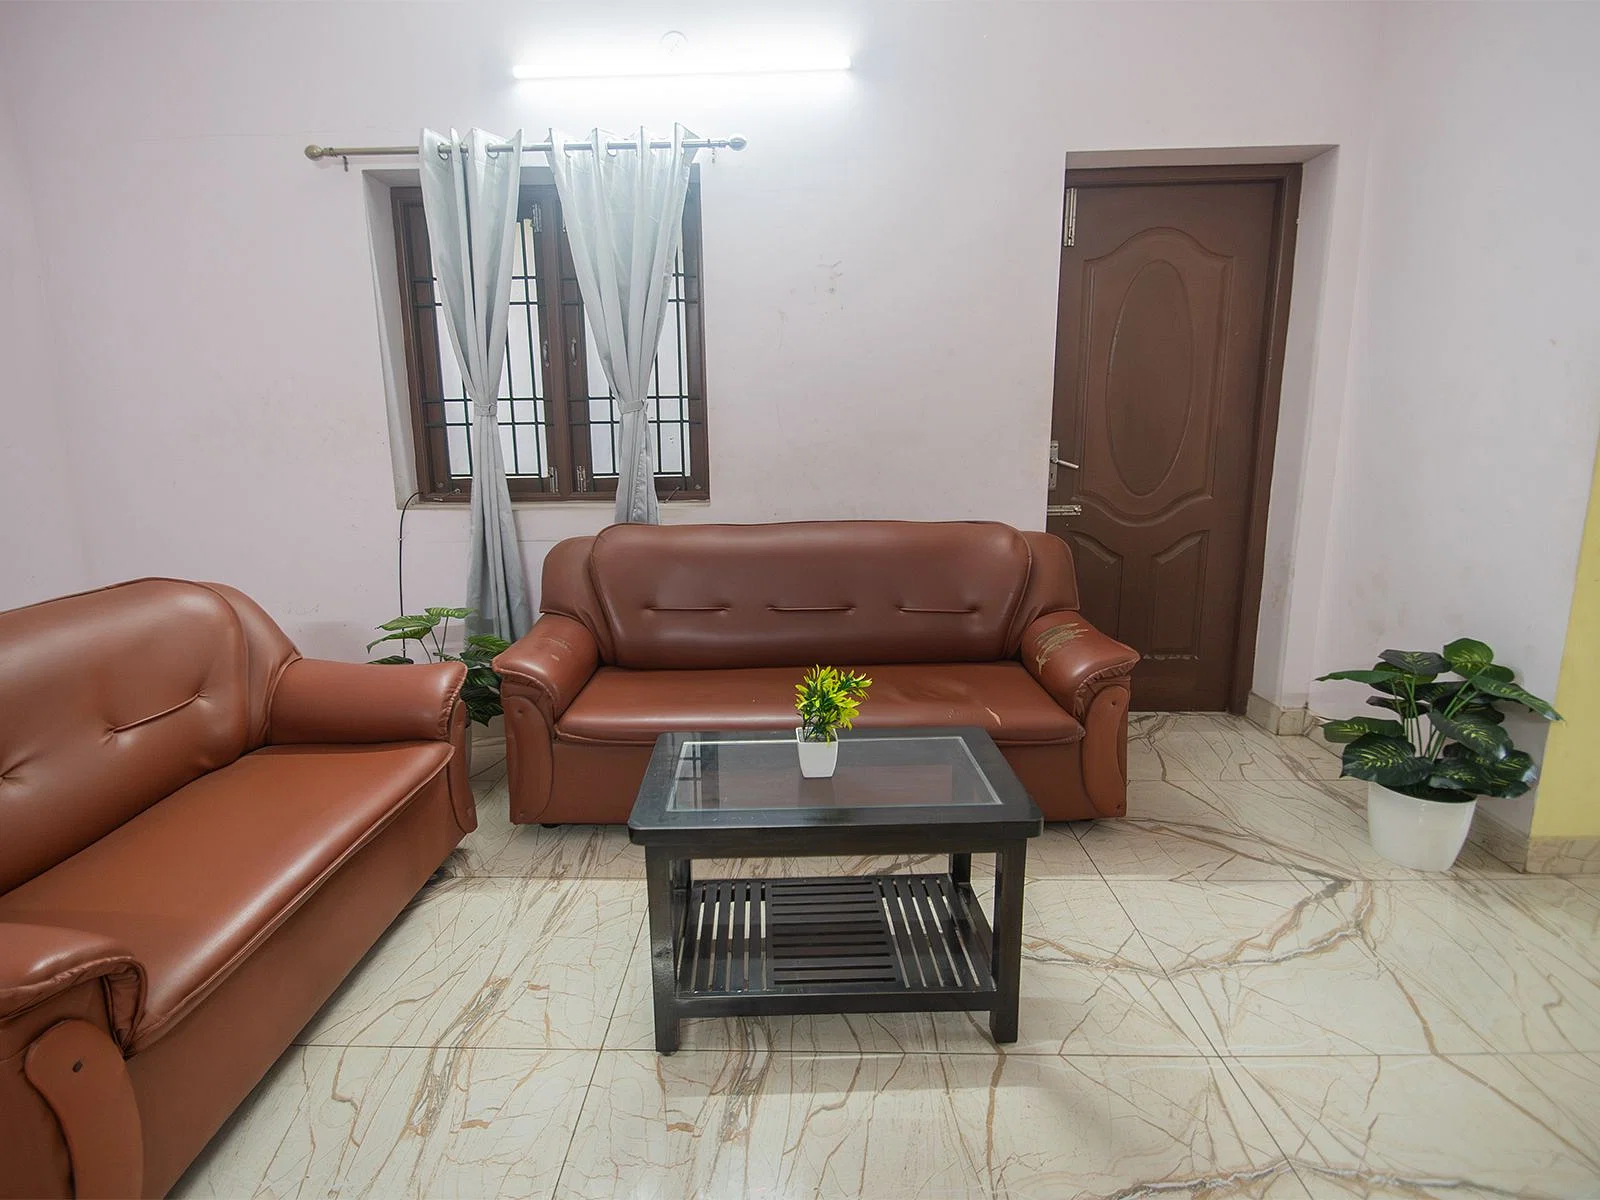 pgs in Iyyappanthangal with Daily housekeeping facilities and free Wi-Fi-Zolo Park Town